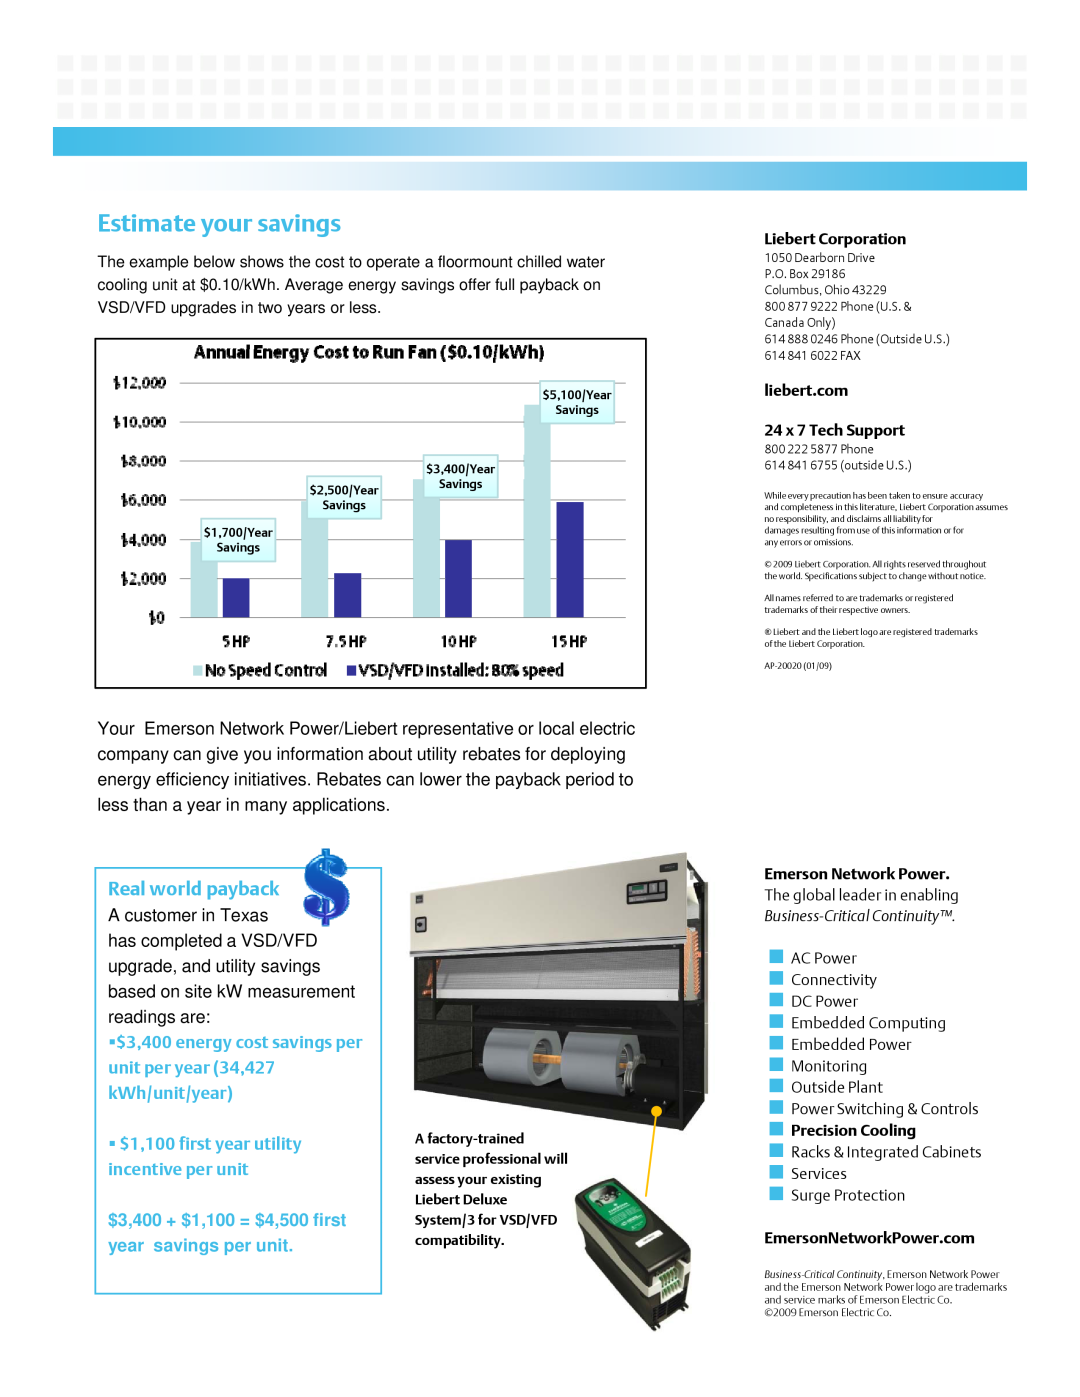 Emerson Precision Cooling manual ƒ$3,400 energy cost savings per unit per year 34,427 kWh/unit/year, Estimate your savings 